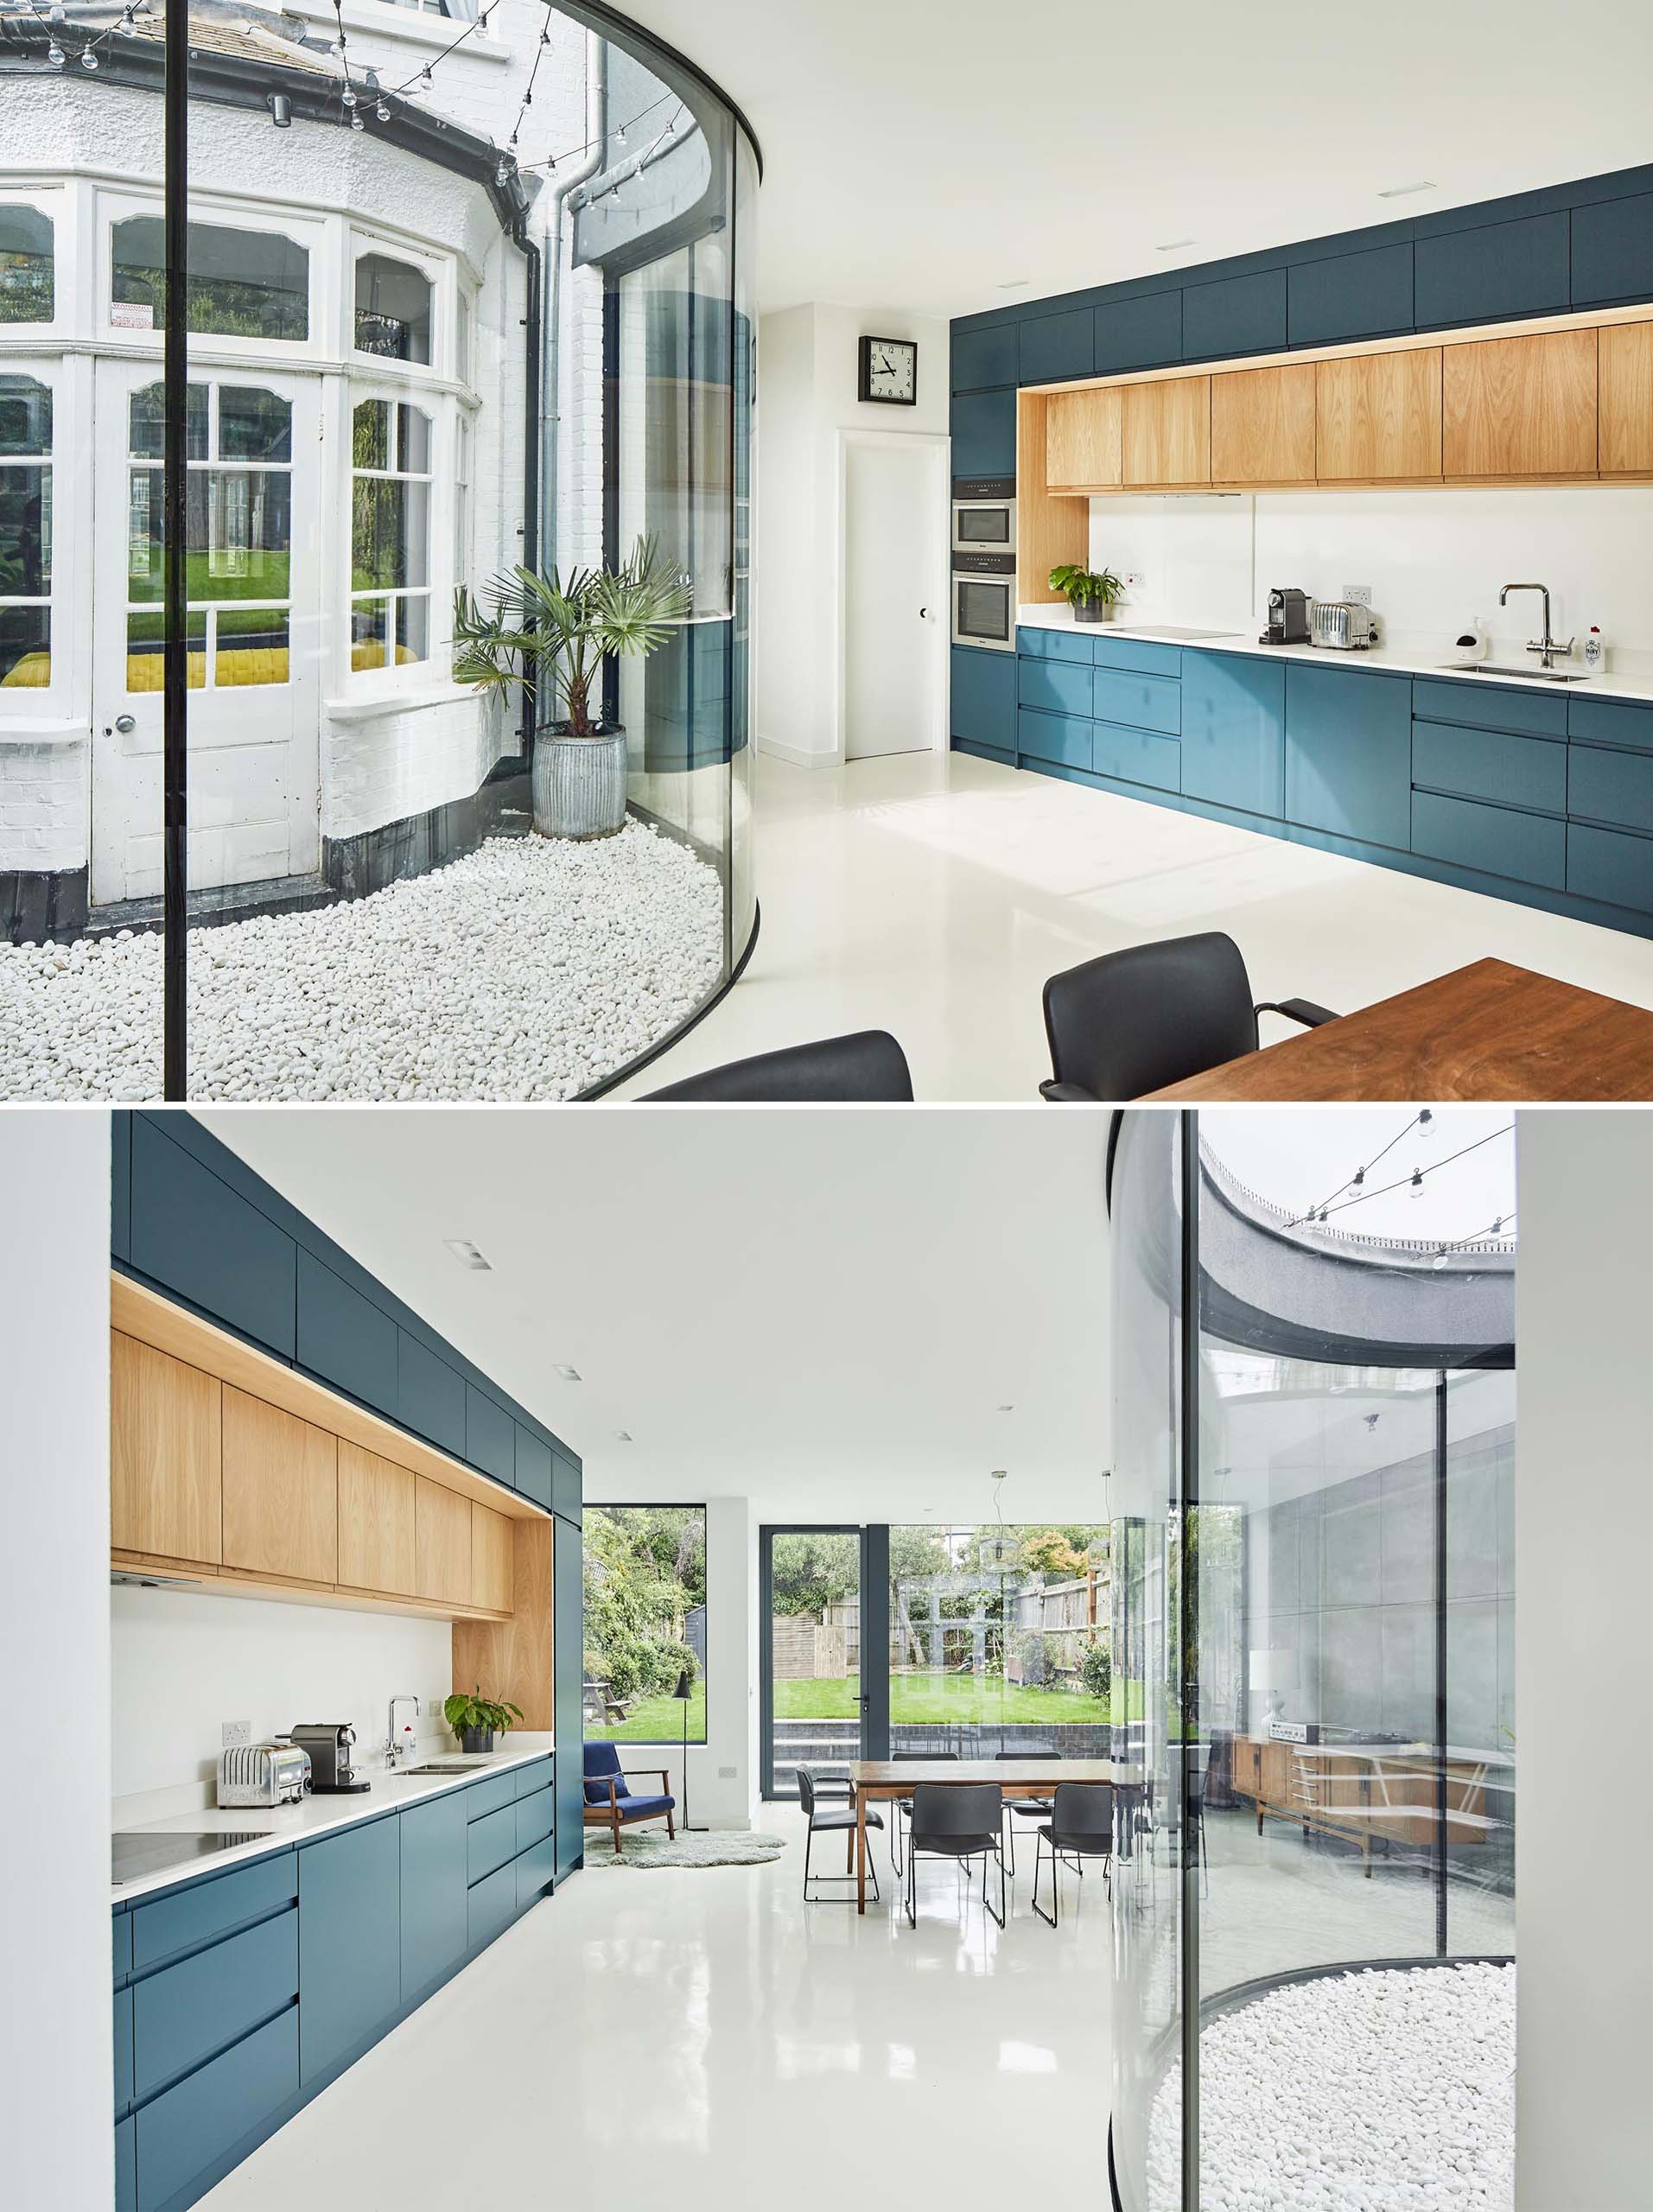 A modern rear extension with a new open plan dining room and kitchen, with the dark blue kitchen cabinets adding a colorful accent to the space. A curved window provides views of a small courtyard and original bay window.